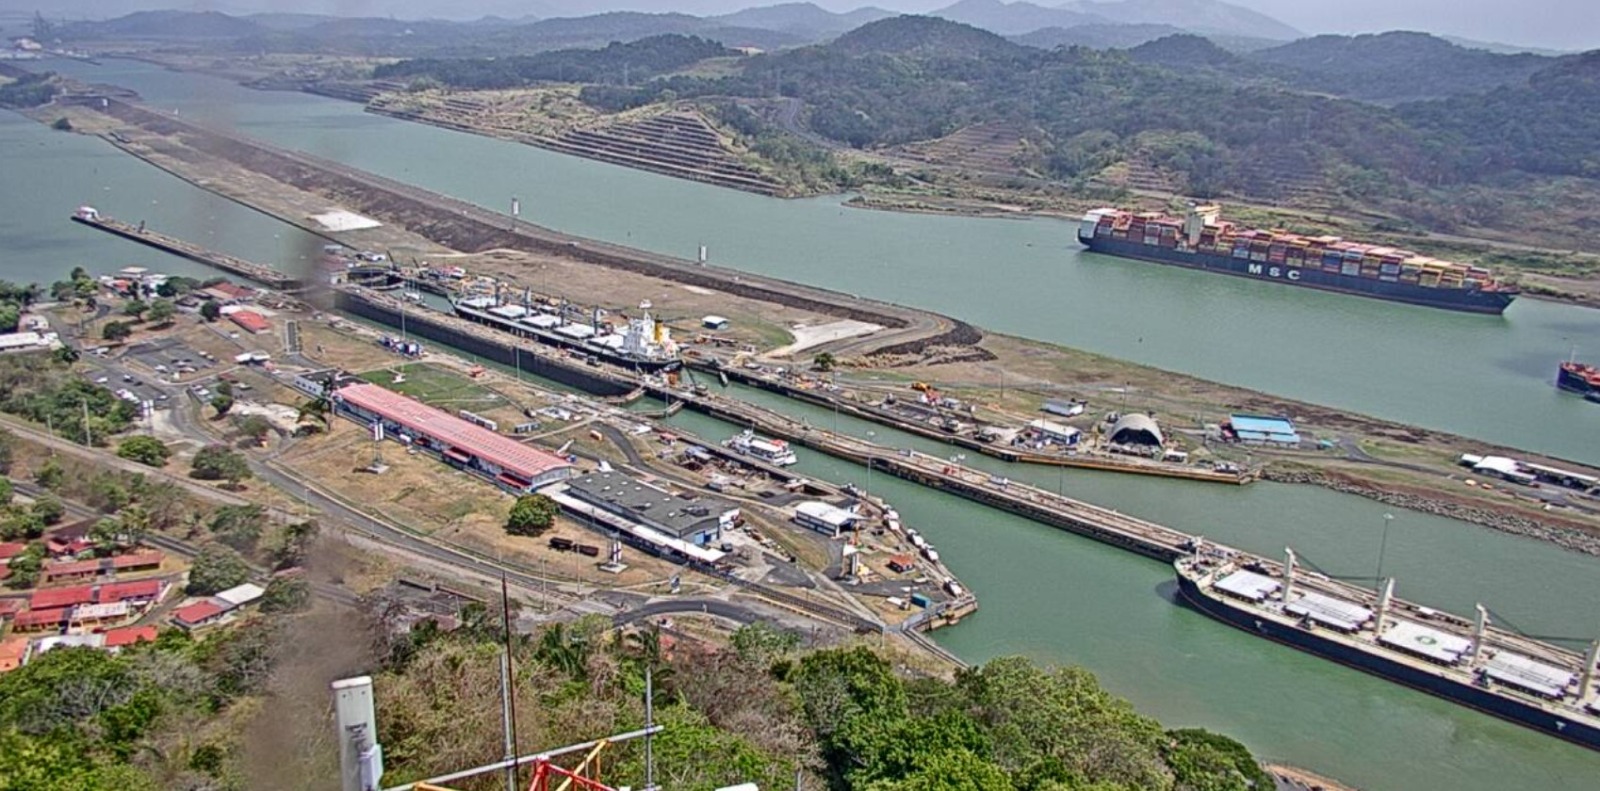 The Panama canal images/2023/can/mia2.jpg